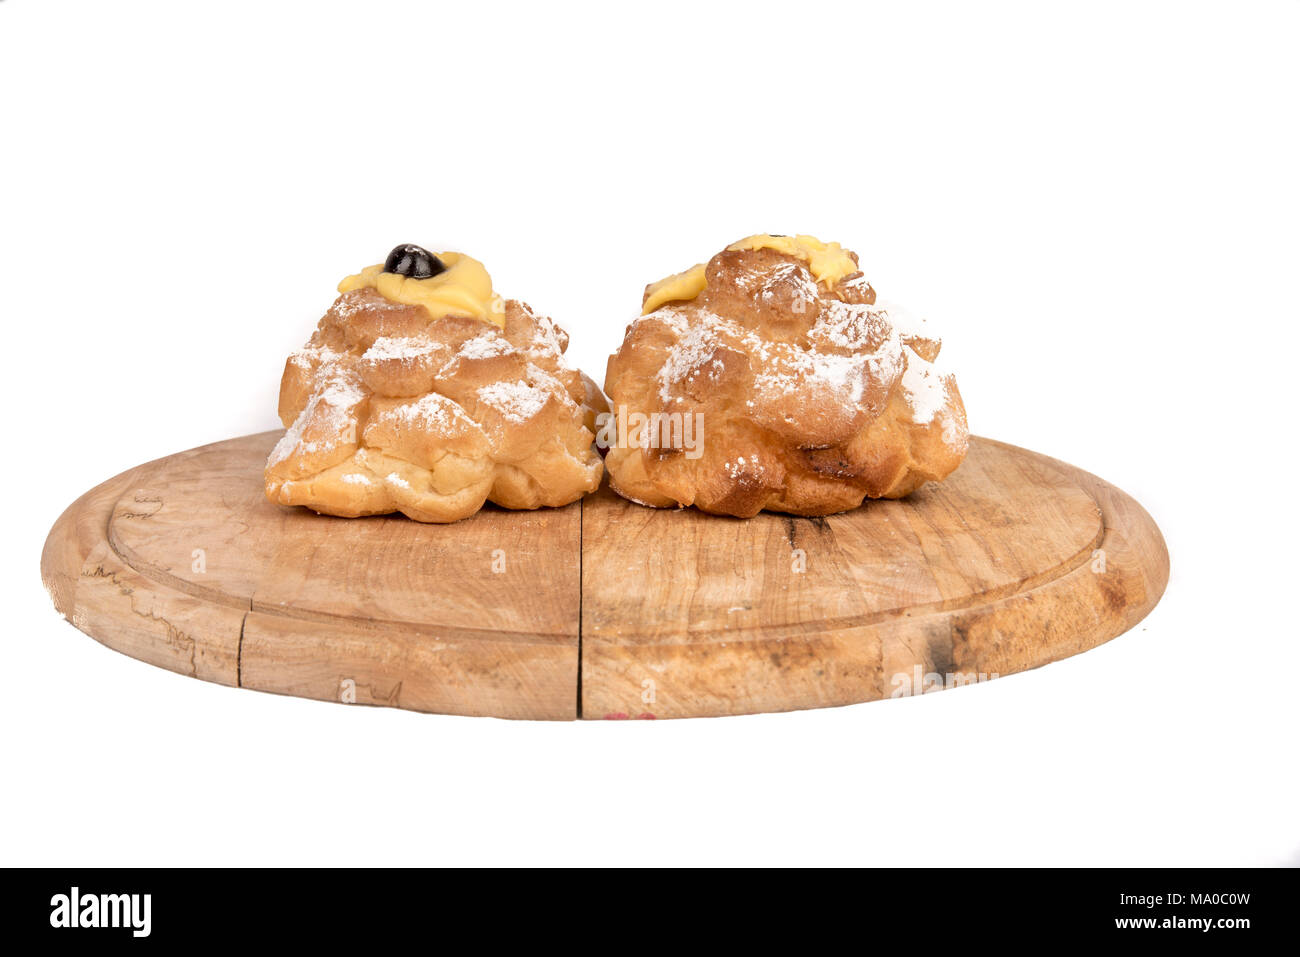 Saint Joseph's Zeppole composition in display on a wooden plate Stock Photo